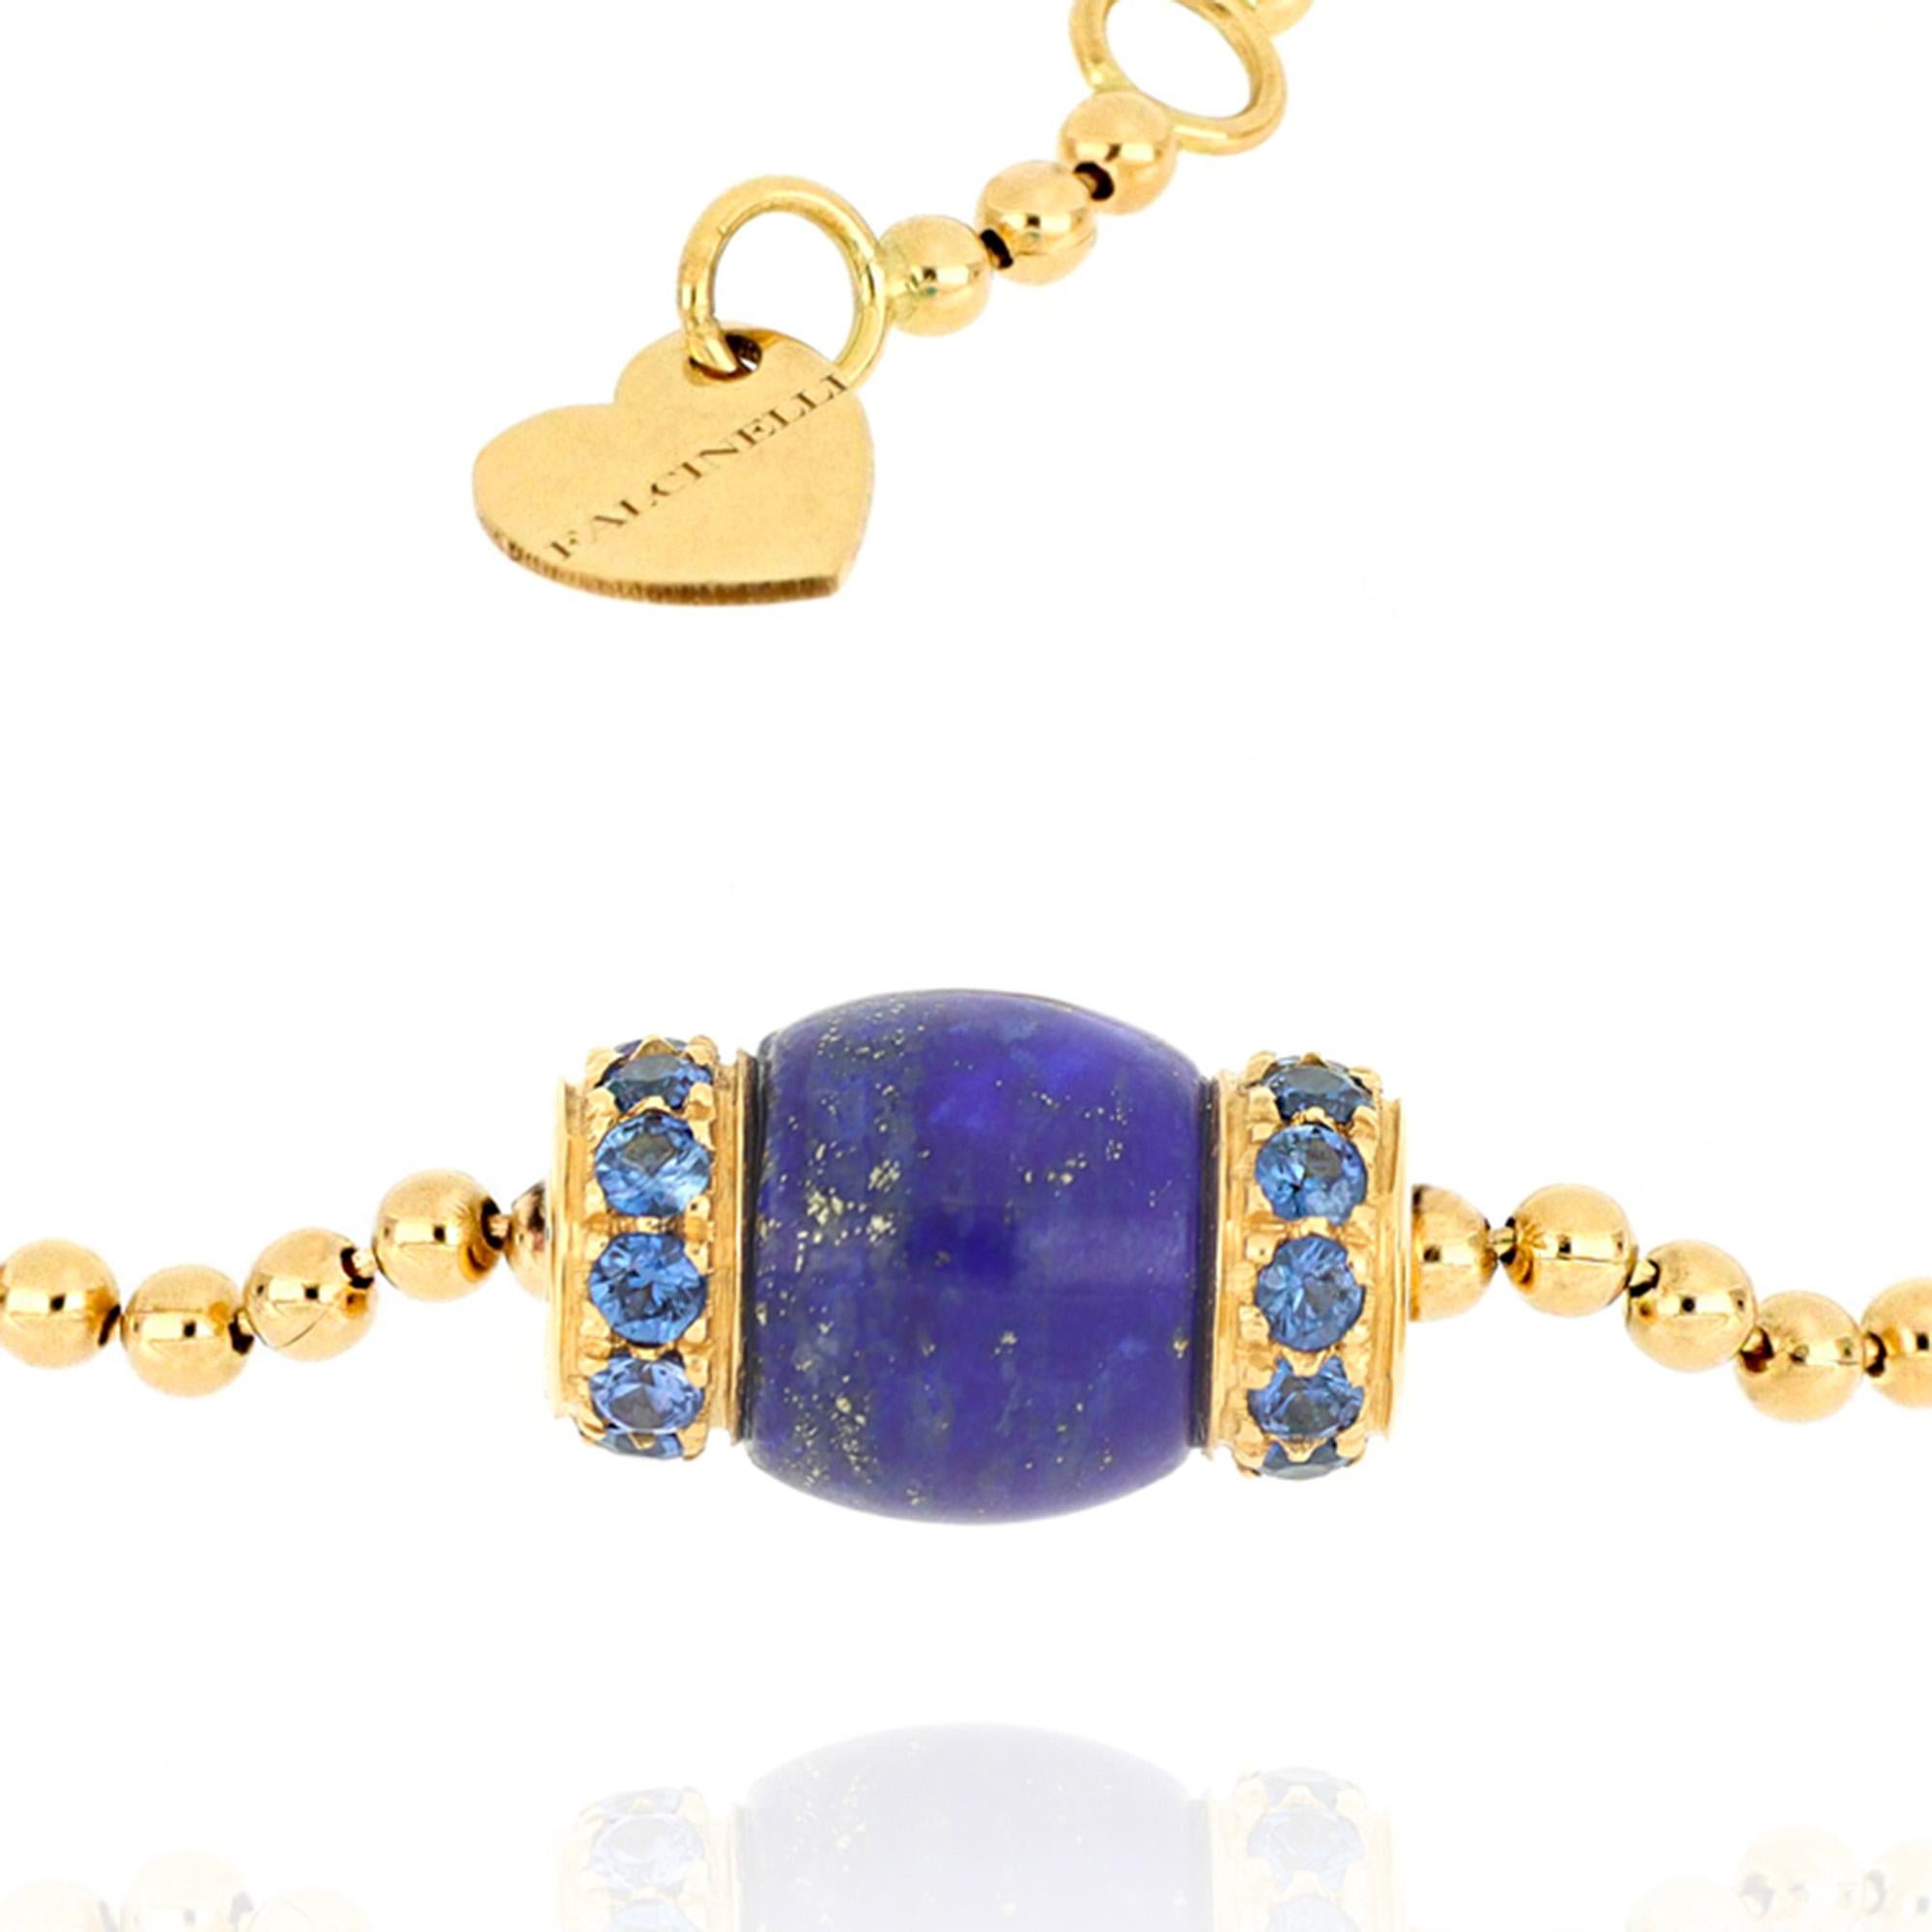 The 18 karat yellow gold ball chain, light and comfortable on the skin, reveals all the craftsmanship with which this bracelet from Le Carrousel collection was designed. The barrel-shaped central pendant is enhanced by the deep color of lapis lazuli